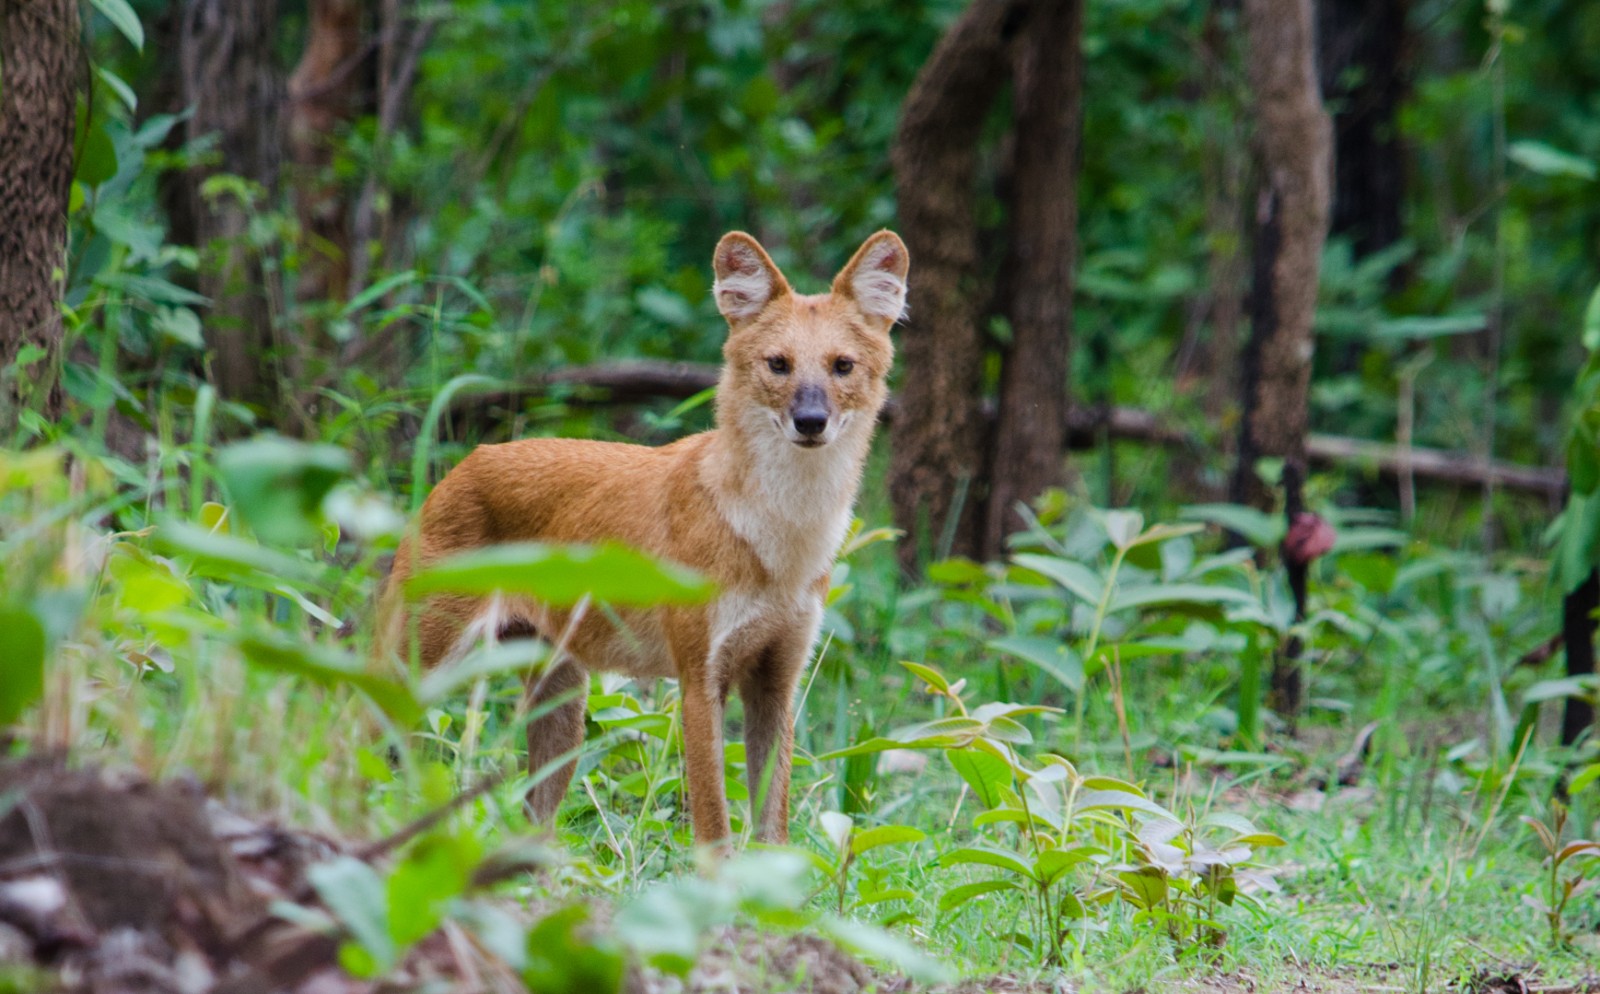 Dhole by Yashvardhan Dalmia from Pench Tiger Reserve